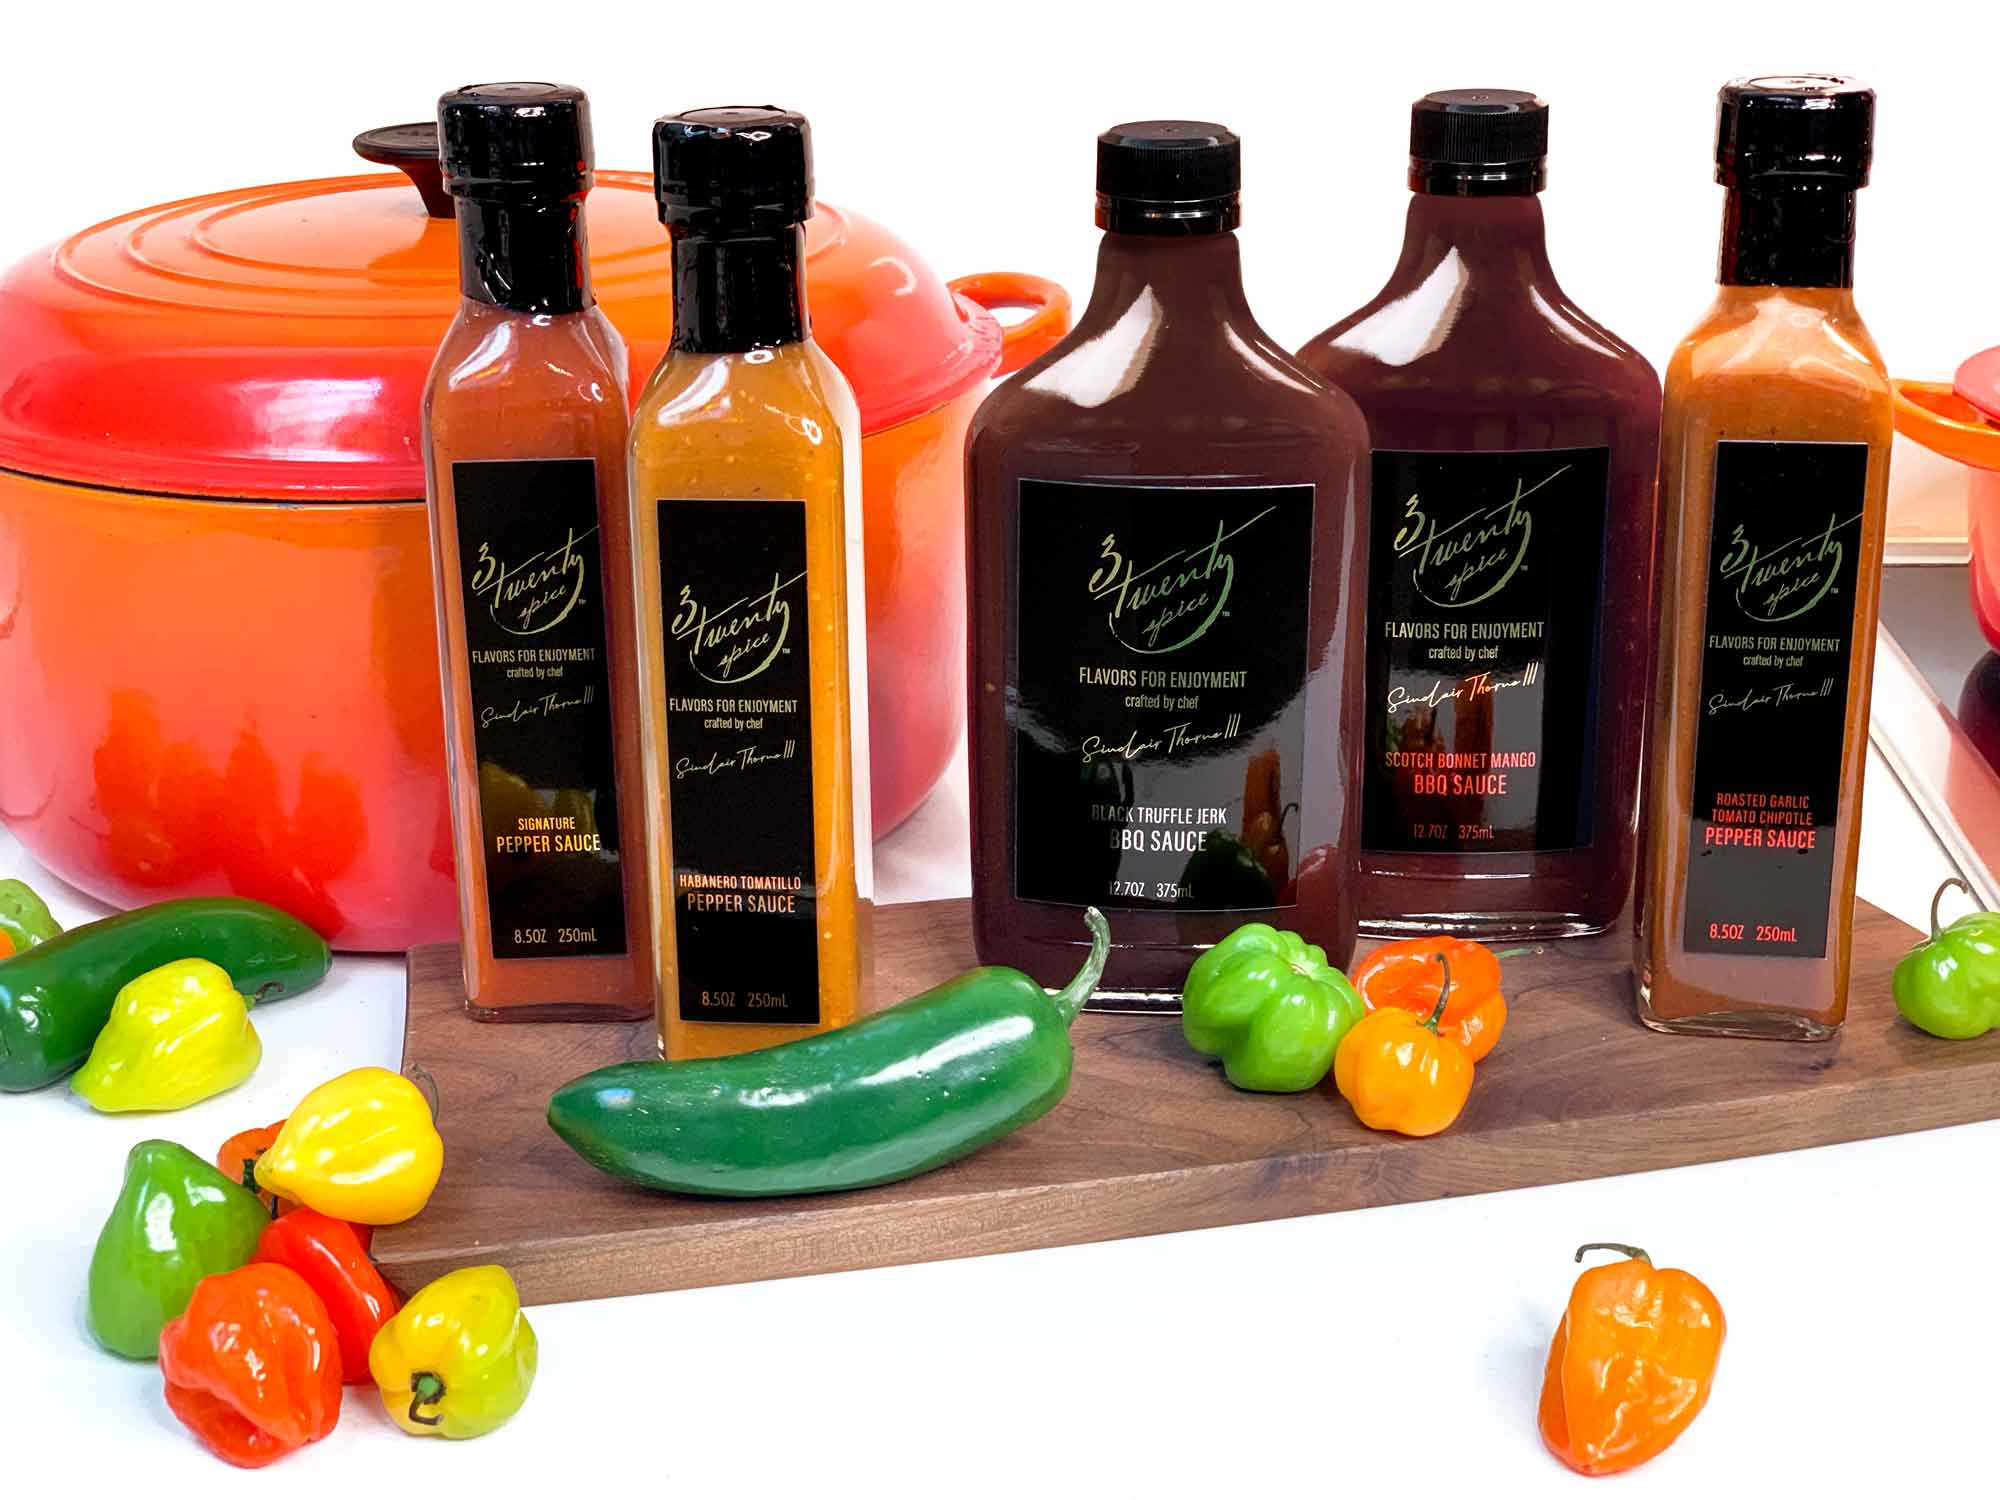 3TwentySpice : bringing a bold, yet approachable, brand with robust flavors and signature spices to market